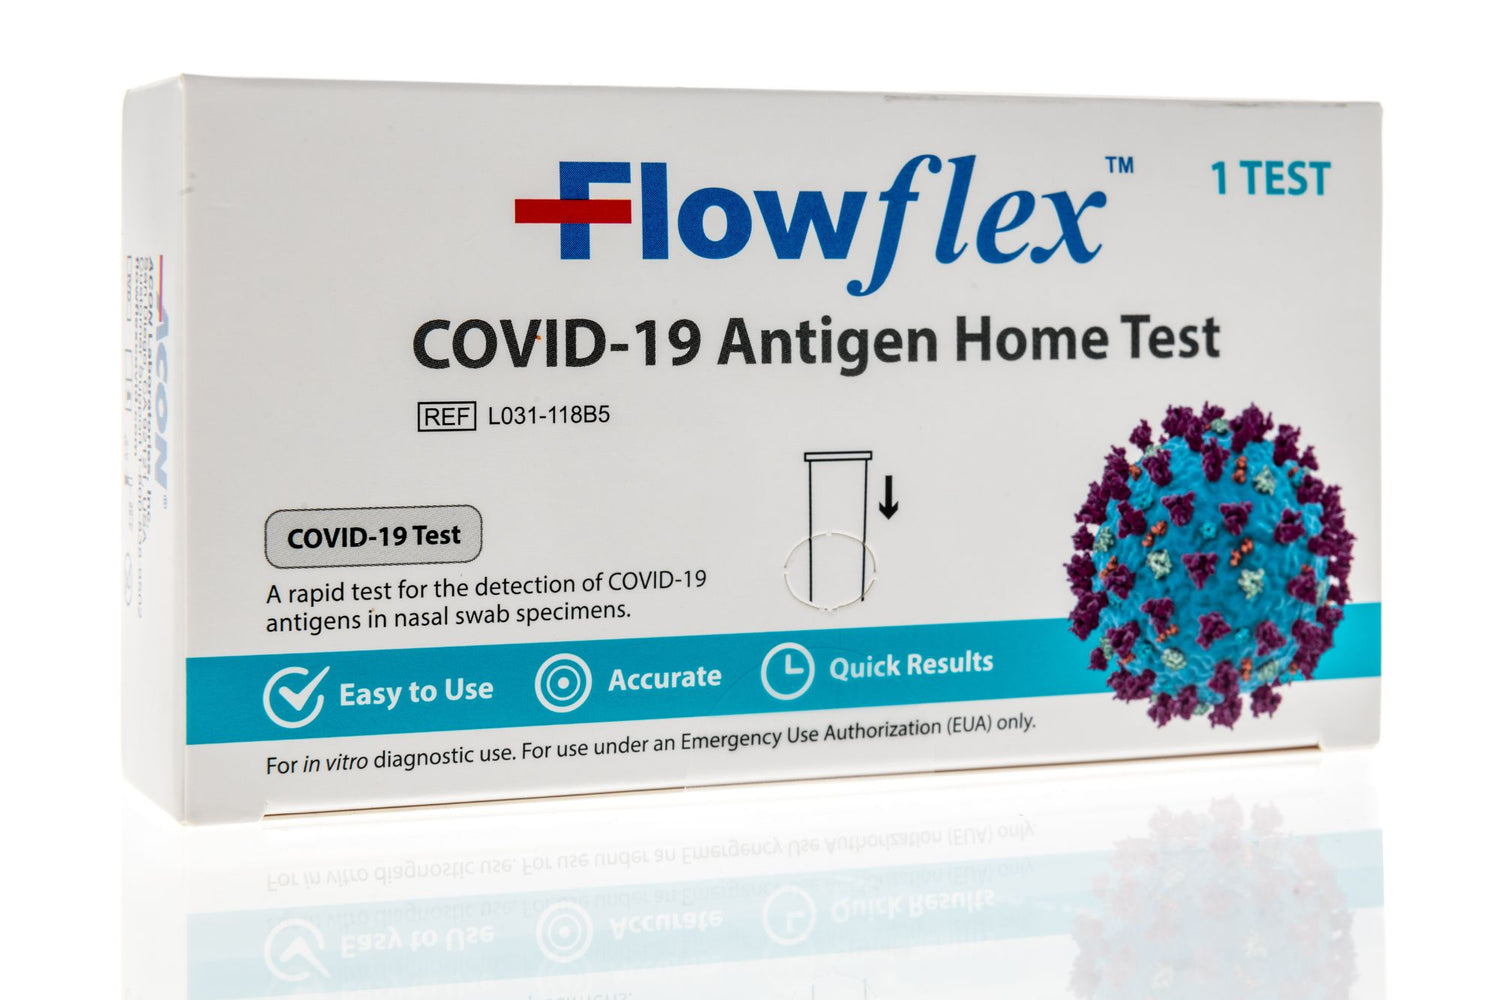 Free Covid-19 at home tests